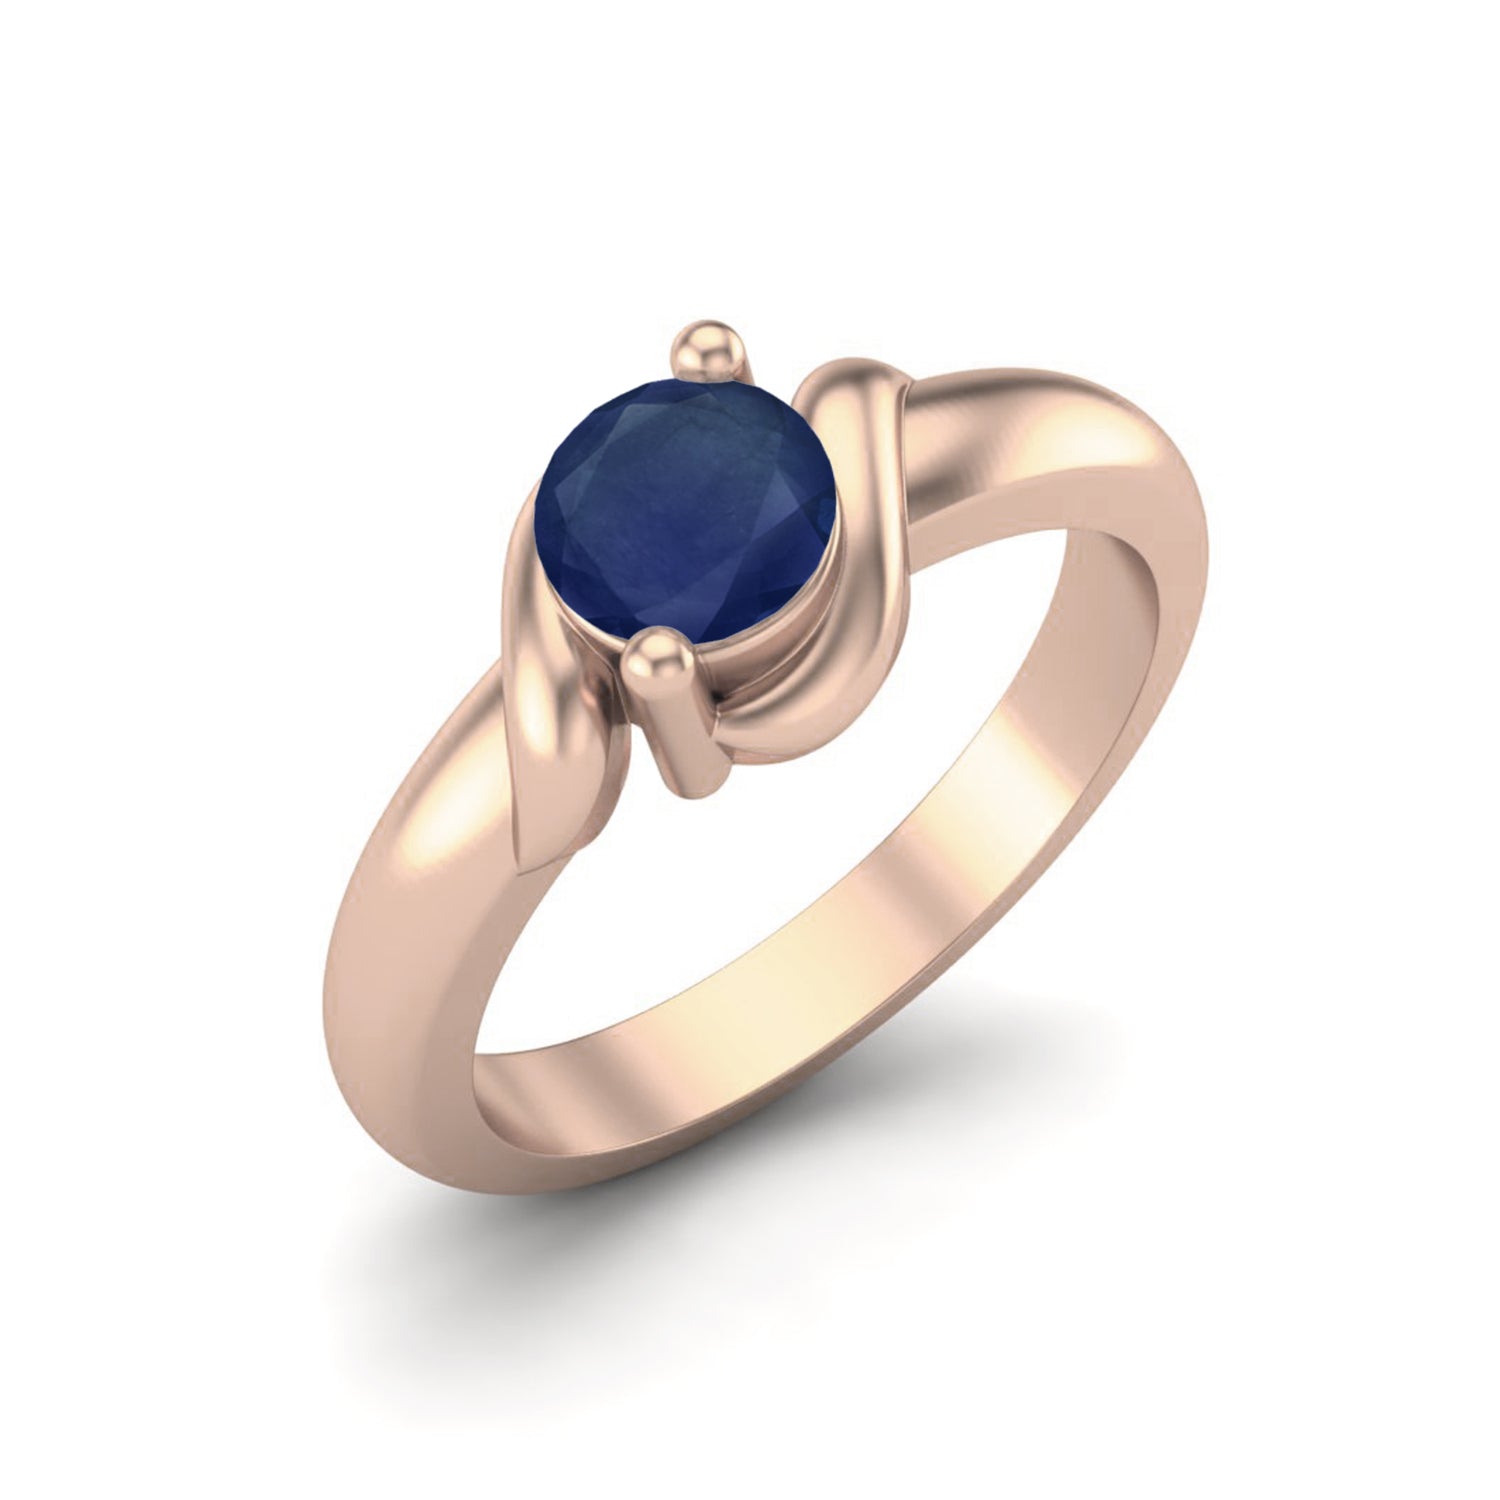 Signature Collection Genuine Blue Sapphire and Diamond Ring in 14k Yellow  Gold - 12170 12170 - Emerald Lady Jewelry